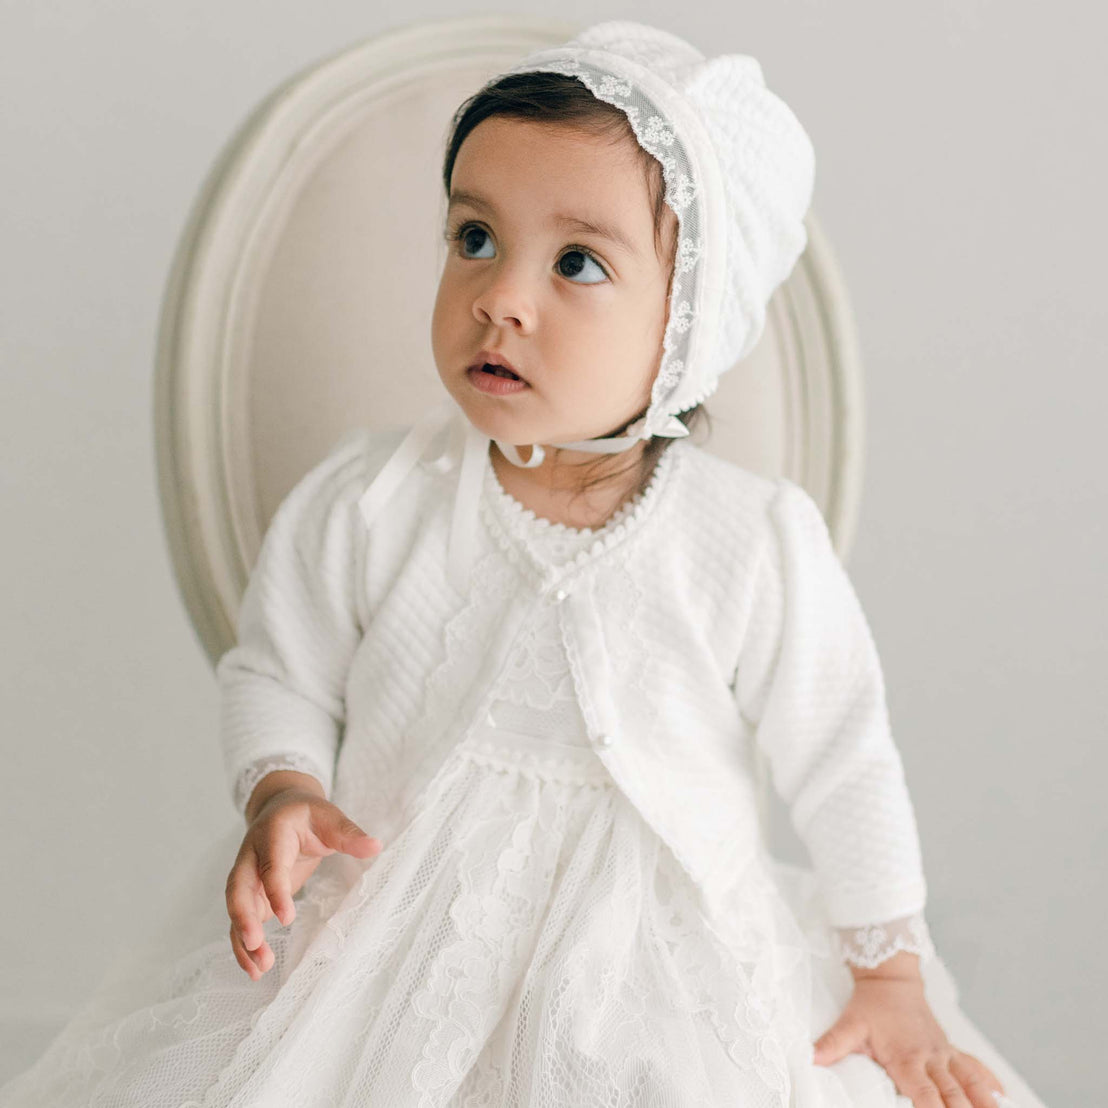 Wider shot photo of baby girl wearing a baptism bonnet and the Victoria quilted cotton baptism sweater.